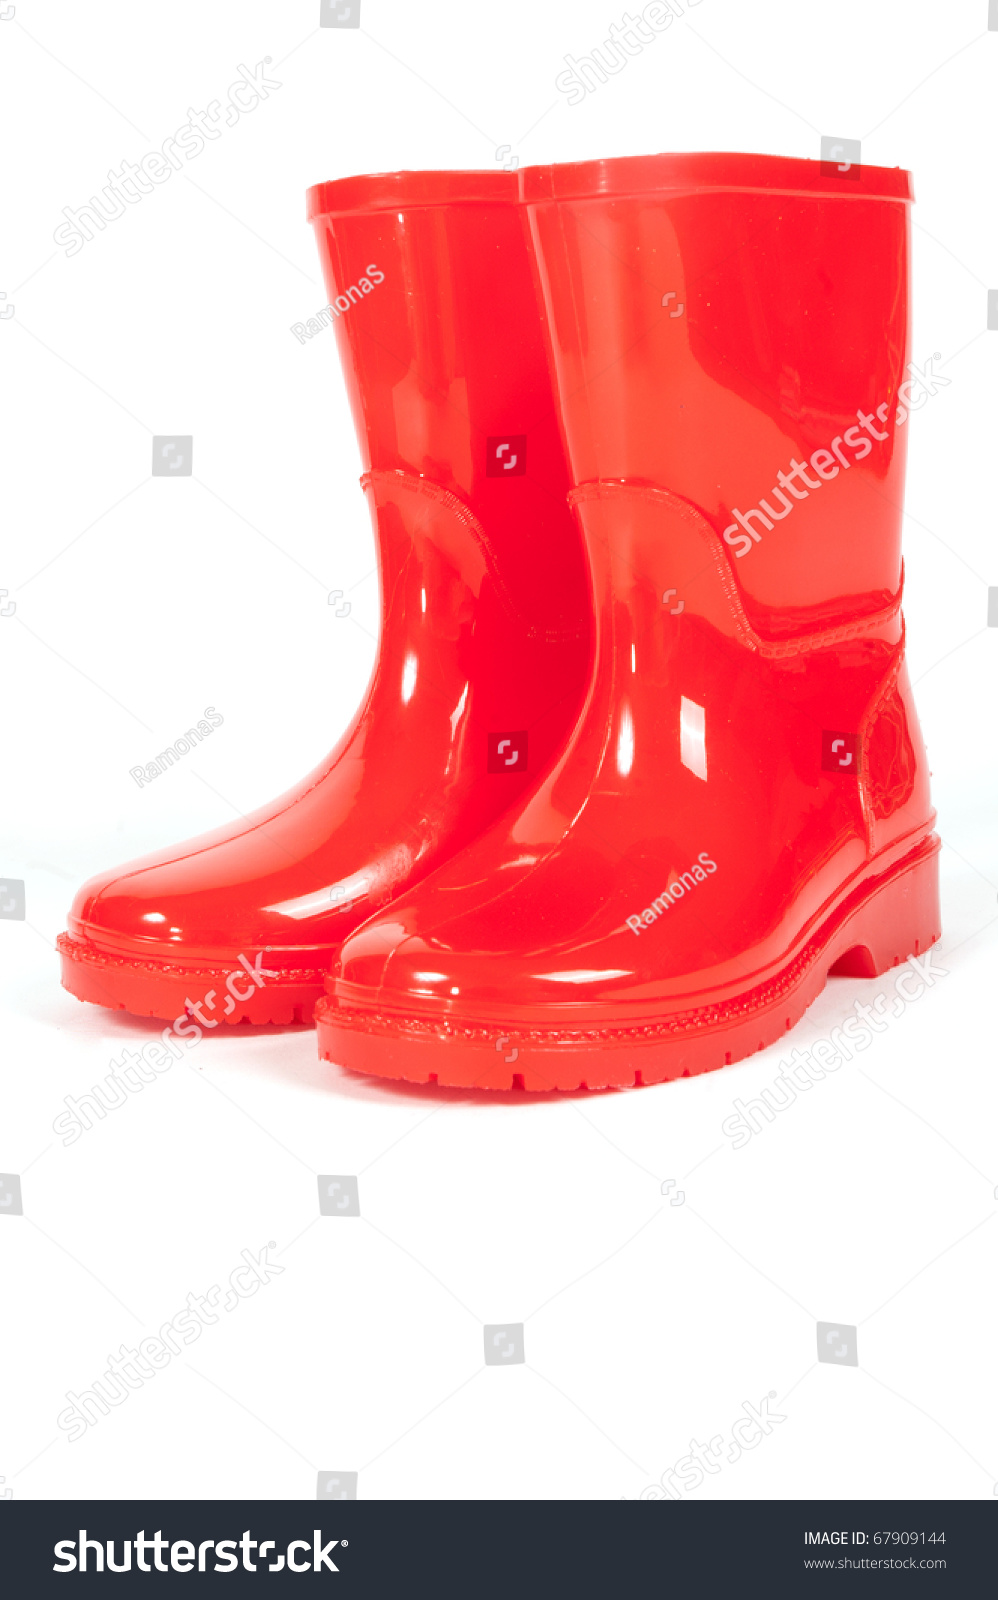 A pair of red rainboots on a white background #67909144